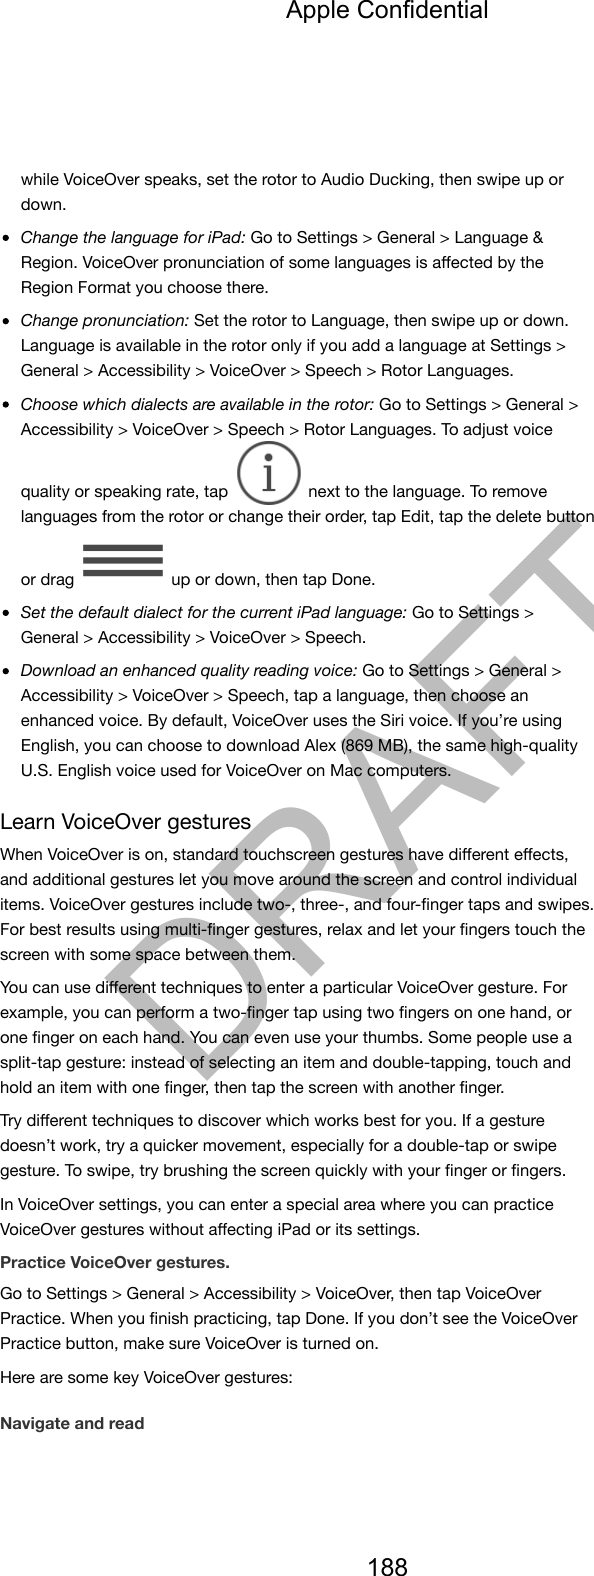 while VoiceOver speaks, set the rotor to Audio Ducking, then swipe up ordown.Change the language for iPad: Go to Settings &gt; General &gt; Language &amp;Region. VoiceOver pronunciation of some languages is aﬀected by theRegion Format you choose there.Change pronunciation: Set the rotor to Language, then swipe up or down.Language is available in the rotor only if you add a language at Settings &gt;General &gt; Accessibility &gt; VoiceOver &gt; Speech &gt; Rotor Languages.Choose which dialects are available in the rotor: Go to Settings &gt; General &gt;Accessibility &gt; VoiceOver &gt; Speech &gt; Rotor Languages. To adjust voicequality or speaking rate, tap   next to the language. To removelanguages from the rotor or change their order, tap Edit, tap the delete buttonor drag   up or down, then tap Done.Set the default dialect for the current iPad language: Go to Settings &gt;General &gt; Accessibility &gt; VoiceOver &gt; Speech.Download an enhanced quality reading voice: Go to Settings &gt; General &gt;Accessibility &gt; VoiceOver &gt; Speech, tap a language, then choose anenhanced voice. By default, VoiceOver uses the Siri voice. If you’re usingEnglish, you can choose to download Alex (869 MB), the same high-qualityU.S. English voice used for VoiceOver on Mac computers.Learn VoiceOver gesturesWhen VoiceOver is on, standard touchscreen gestures have diﬀerent eﬀects,and additional gestures let you move around the screen and control individualitems. VoiceOver gestures include two-, three-, and four-ﬁnger taps and swipes.For best results using multi-ﬁnger gestures, relax and let your ﬁngers touch thescreen with some space between them.You can use diﬀerent techniques to enter a particular VoiceOver gesture. Forexample, you can perform a two-ﬁnger tap using two ﬁngers on one hand, orone ﬁnger on each hand. You can even use your thumbs. Some people use asplit-tap gesture: instead of selecting an item and double-tapping, touch andhold an item with one ﬁnger, then tap the screen with another ﬁnger.Try diﬀerent techniques to discover which works best for you. If a gesturedoesn’t work, try a quicker movement, especially for a double-tap or swipegesture. To swipe, try brushing the screen quickly with your ﬁnger or ﬁngers.In VoiceOver settings, you can enter a special area where you can practiceVoiceOver gestures without aﬀecting iPad or its settings.Practice VoiceOver gestures.Go to Settings &gt; General &gt; Accessibility &gt; VoiceOver, then tap VoiceOverPractice. When you ﬁnish practicing, tap Done. If you don’t see the VoiceOverPractice button, make sure VoiceOver is turned on.Here are some key VoiceOver gestures:Navigate and readApple Confidential188DRAFT